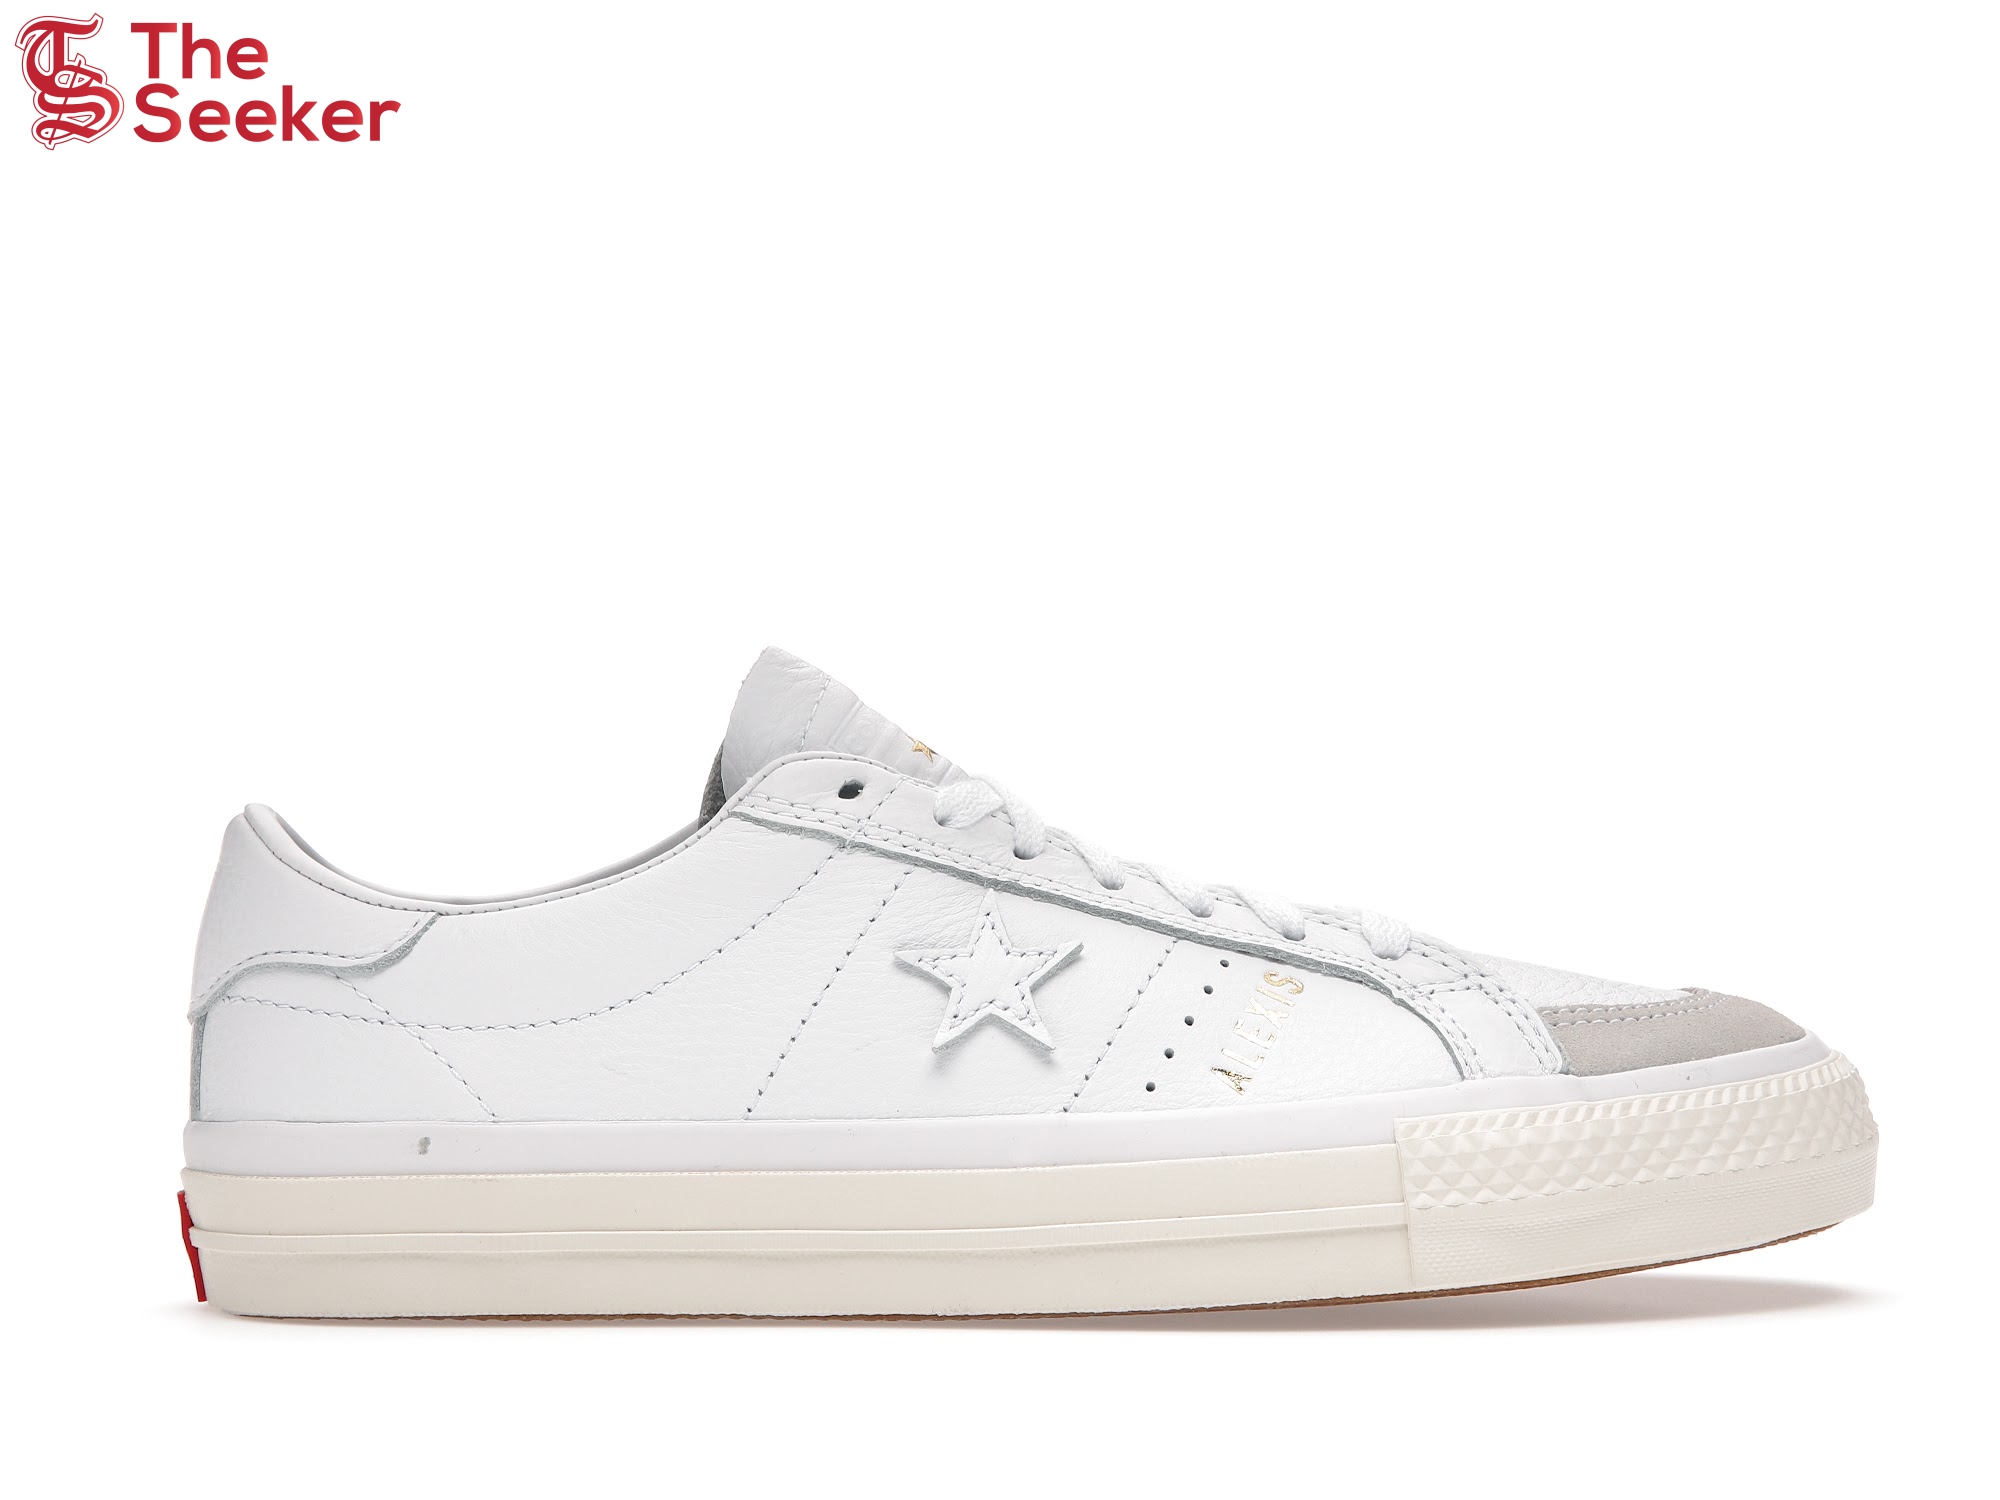 Converse One Star Pro Low Alexis Sablone